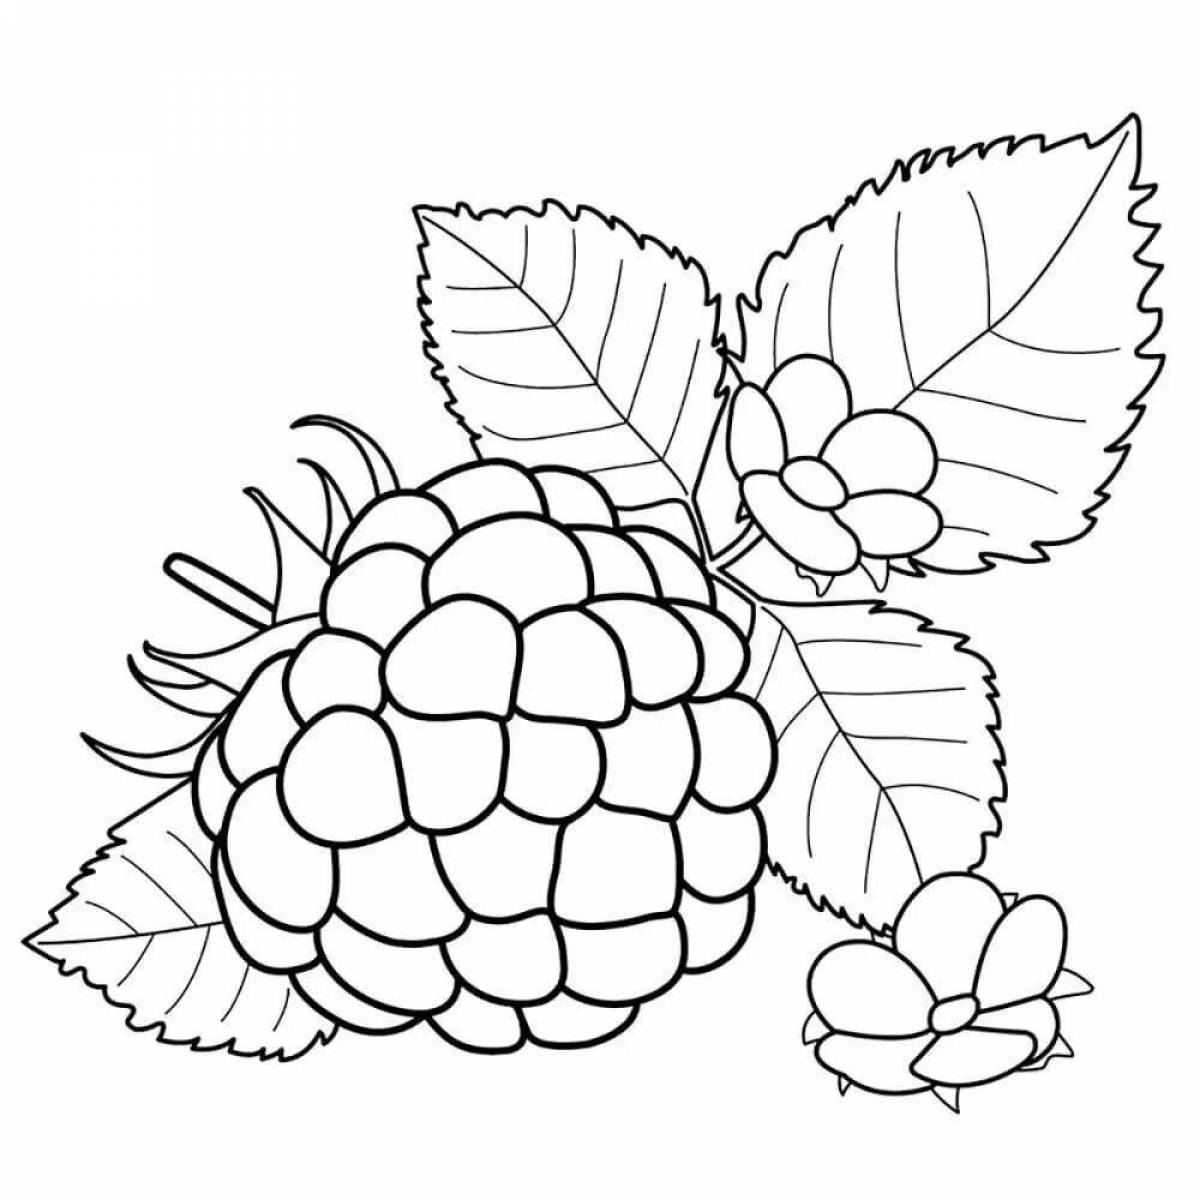 Colorful blackberry coloring book for kids